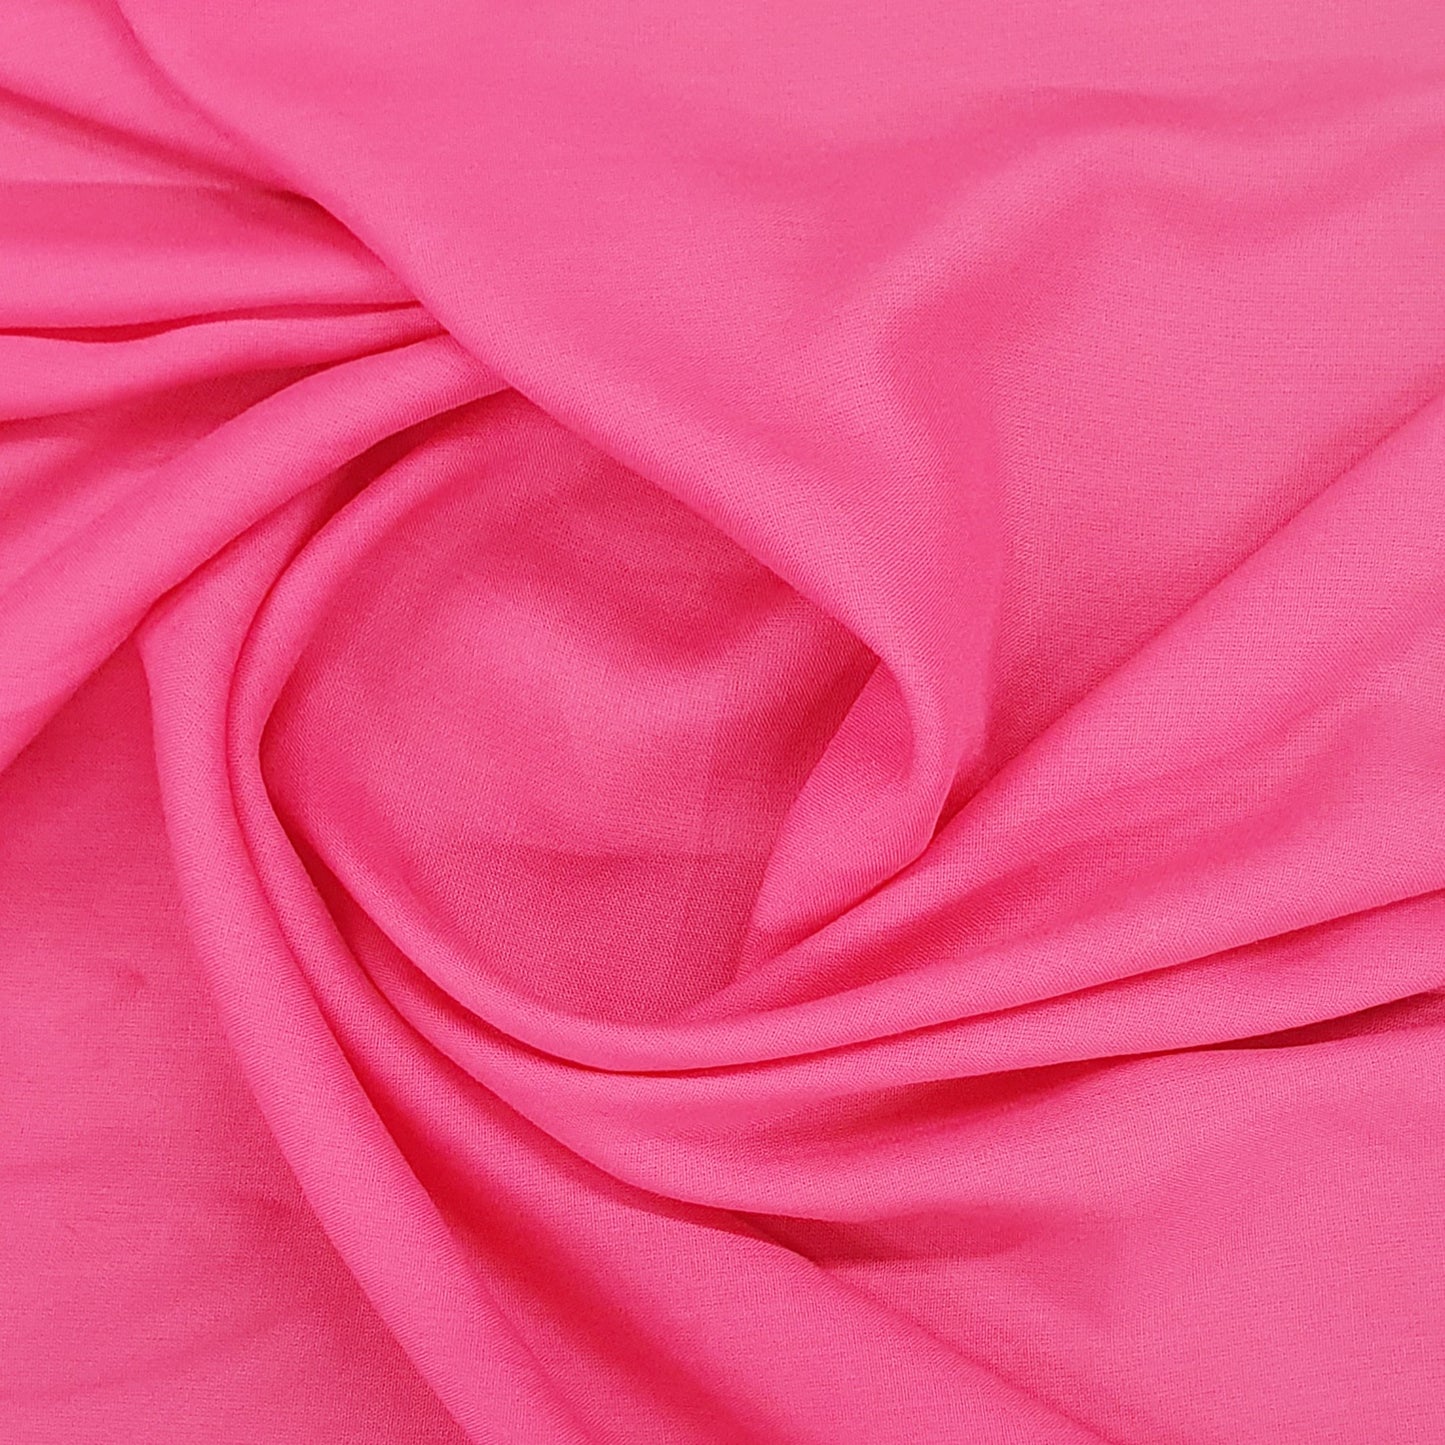 Pink Solid Rayon Fabric Plain Weave 44 Inches